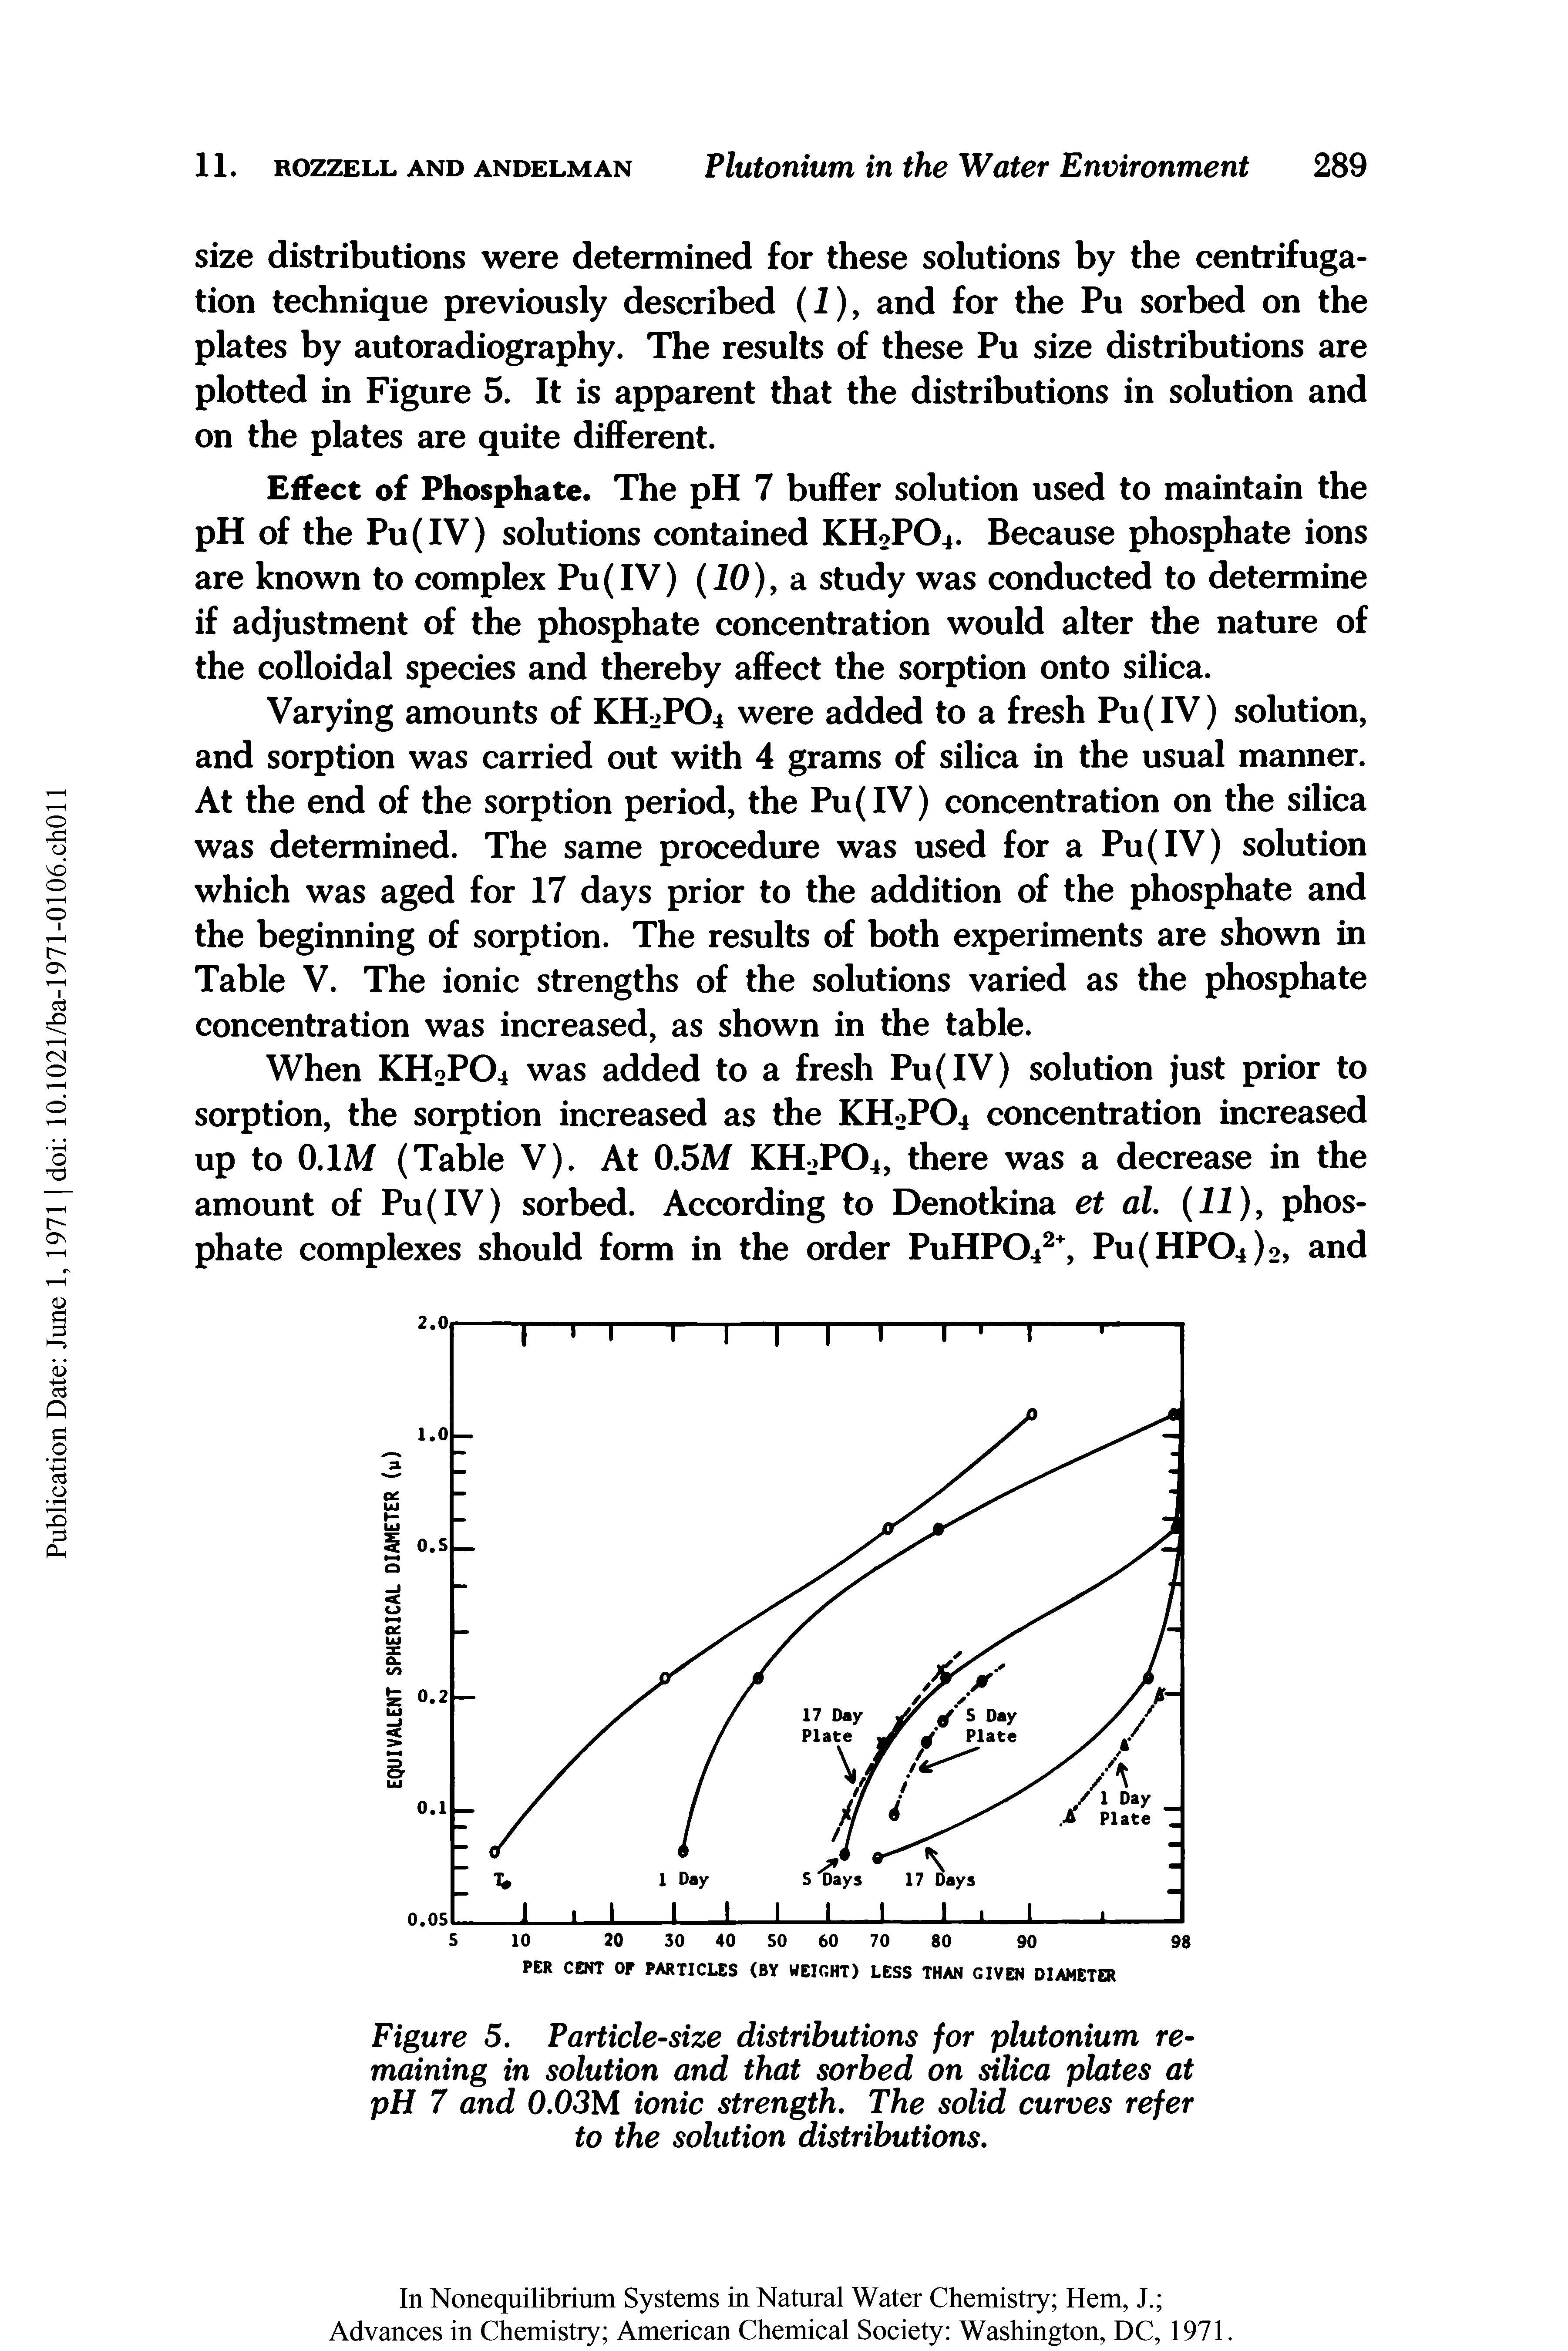 Figure 5. Particle-size distributions for plutonium remaining in solution and that sorbed on silica plates at pH 7 and 0.03M ionic strength. The solid curves refer to the solution distributions.